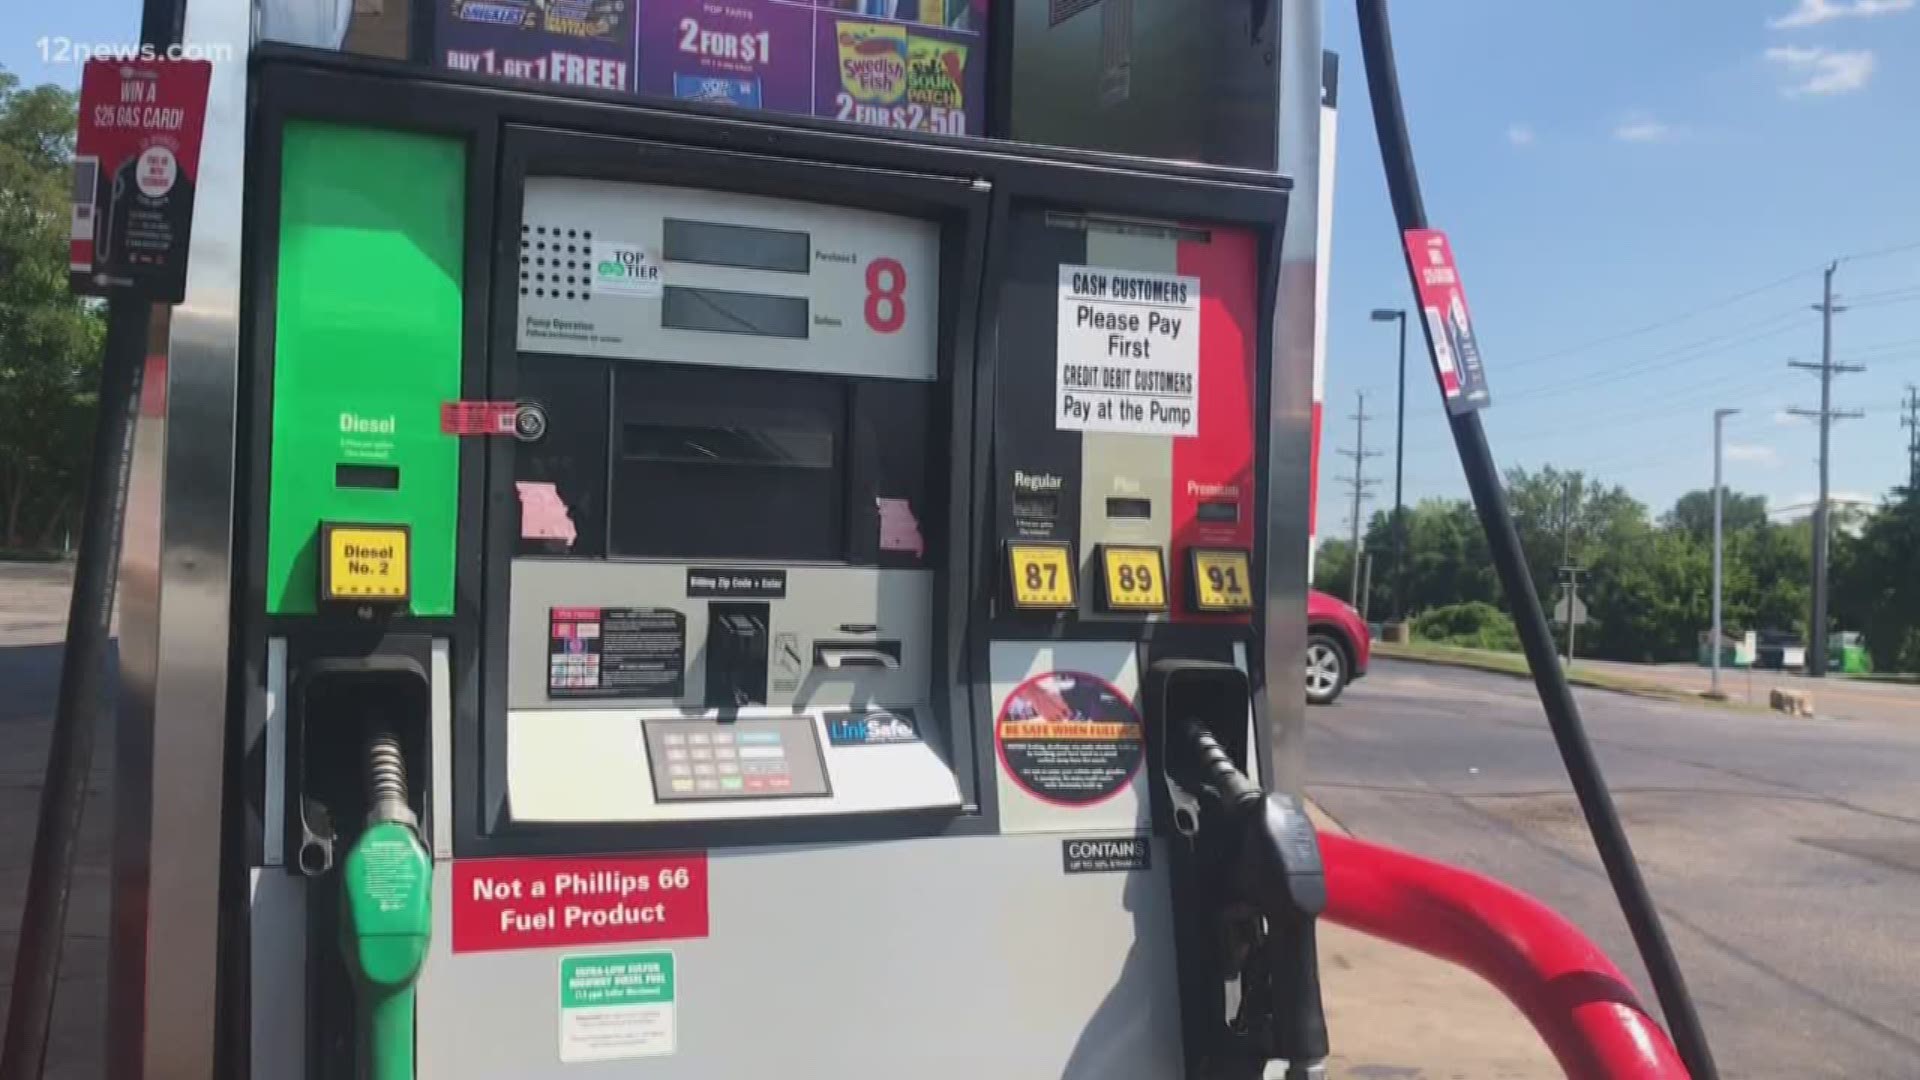 12 News is always looking to keep you safe, and we now have a warning about a new high tech skimming device popping up at gas stations across the country. Here are the fast facts on new Bluetooth technology being used to steal your credit card information.